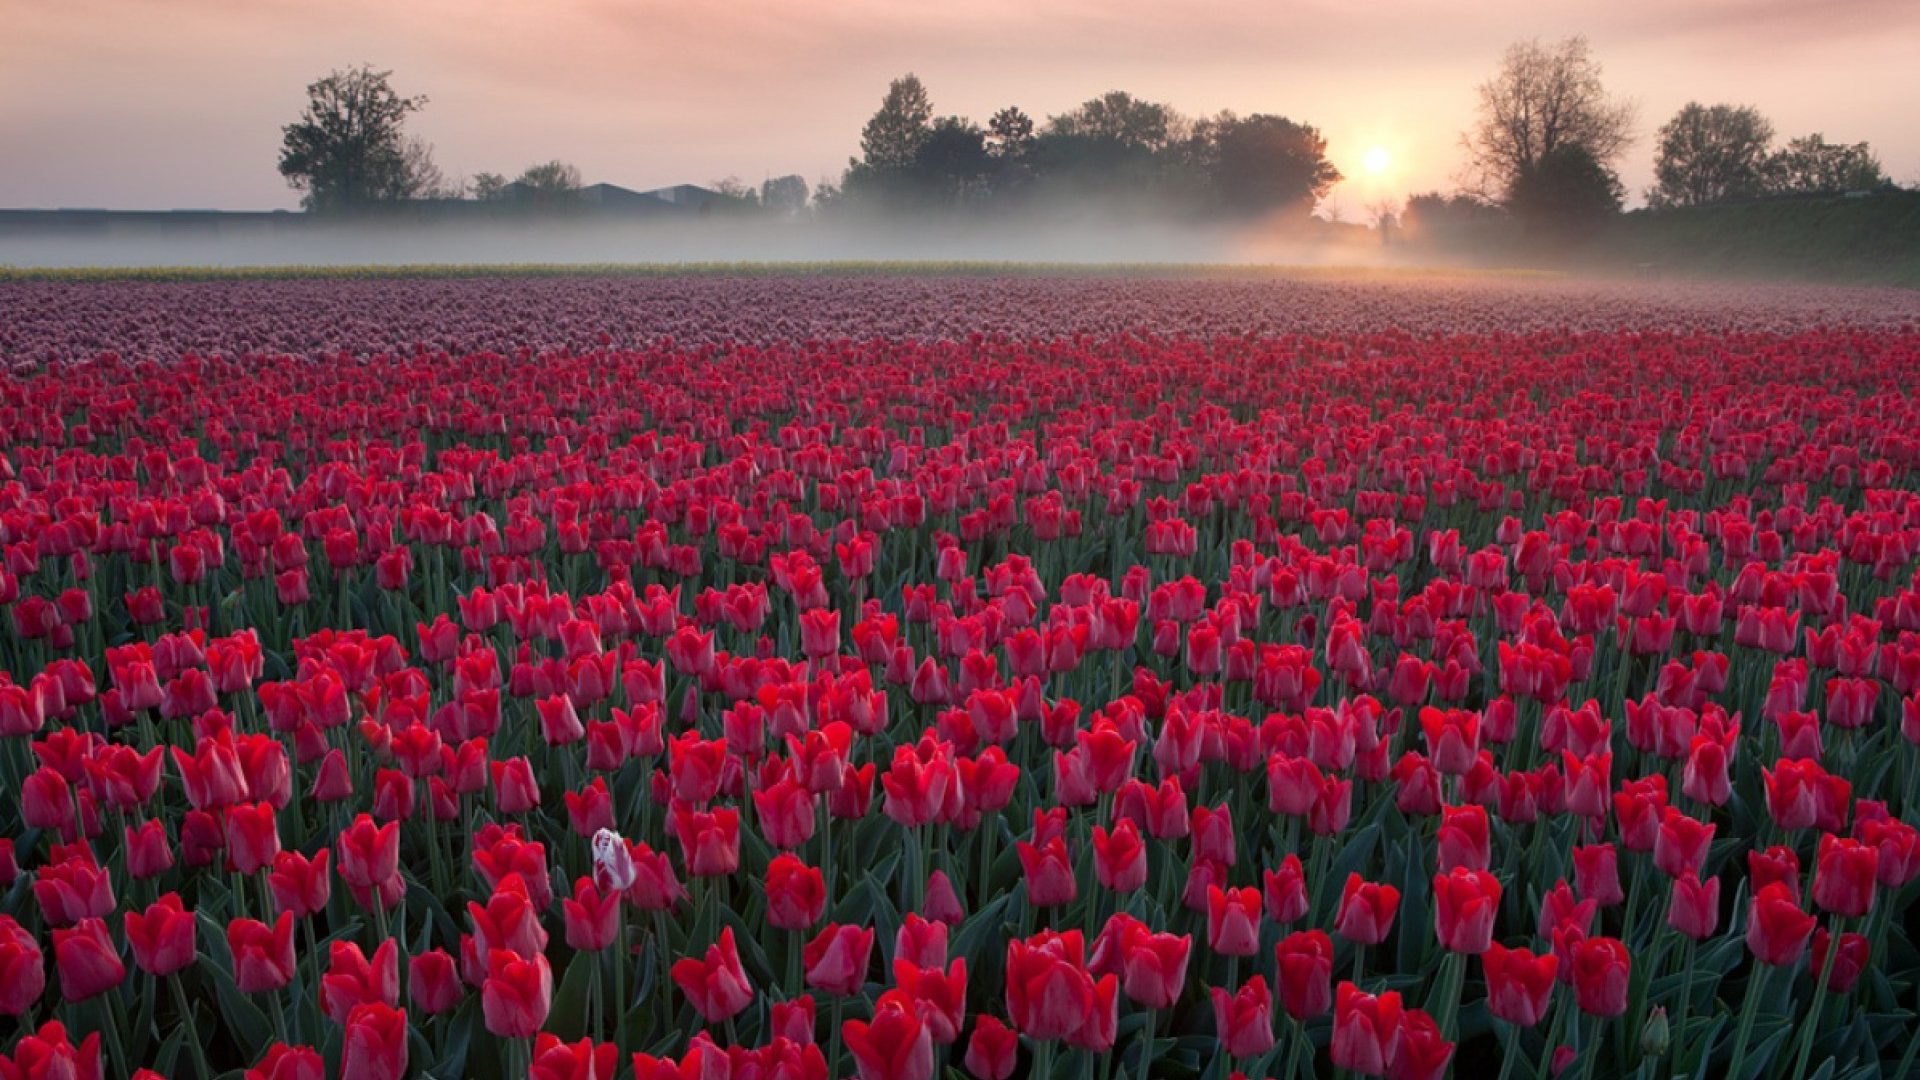 Flowers Field With Red Tulips Sunrise Morning Mist Evaporation Wallpaper Hd  Samsung Mobile Phone 1920x1080 : 